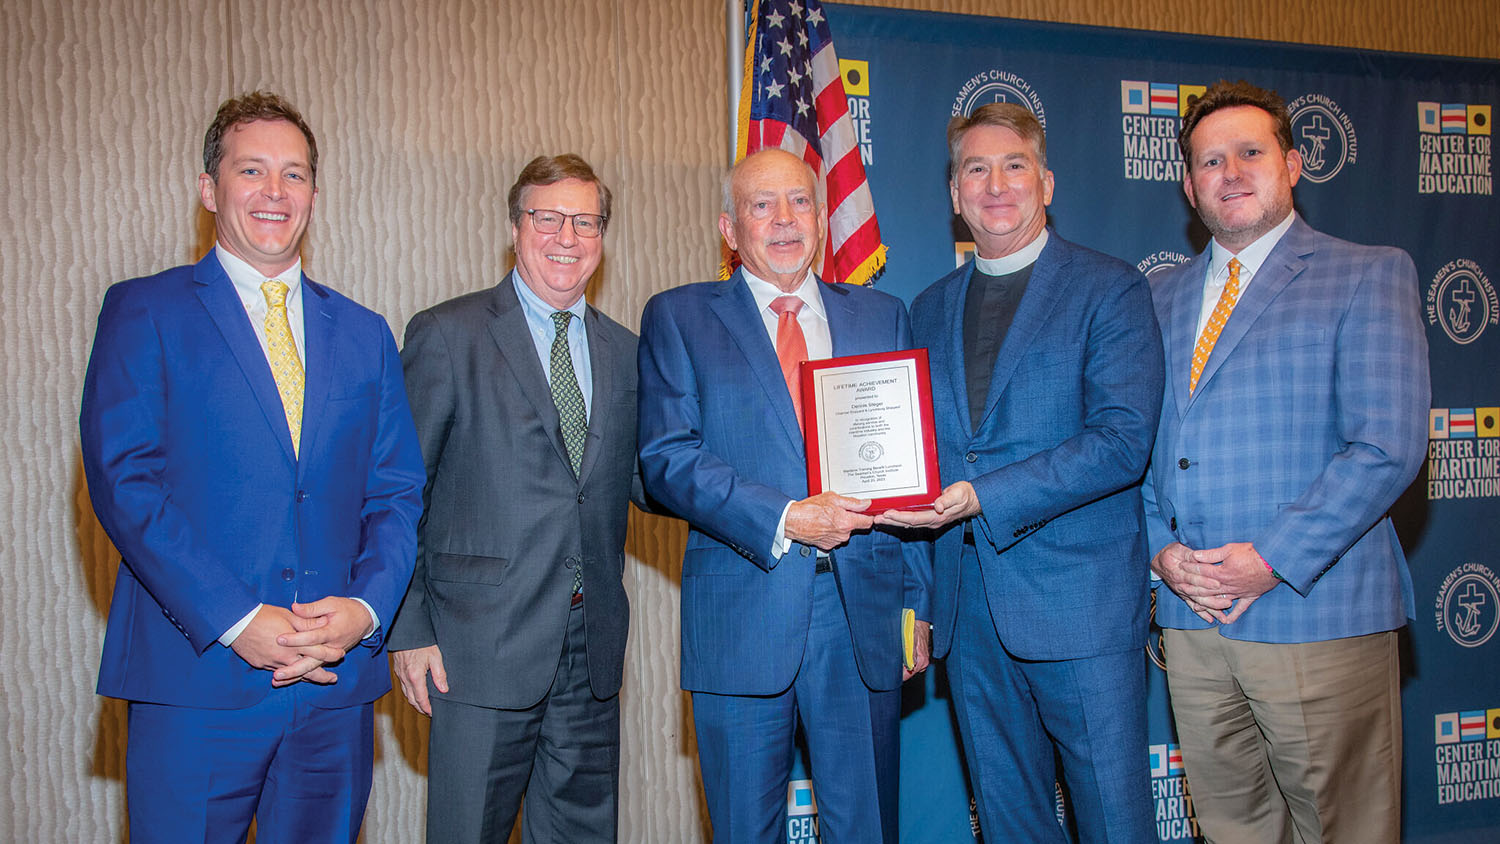 From left: Austin Golding, president and CEO of Golding Barge Line; SCI Board Chair Bruce Paulsen, partner , Seward & Kissel LLP; Lifetime Achievement Award winner Dennis Steger, founder of Channel and Lynchburg Shipyards; the Rev. Mark Nestlehutt, SCI president and executive director; and Clark Todd, president and CEO of Blessey Marine Services. The Maritime Training Benefit Luncheon was co-chaired by Golding and Todd. (Photo courtesy of Seamen’s Church Institute)